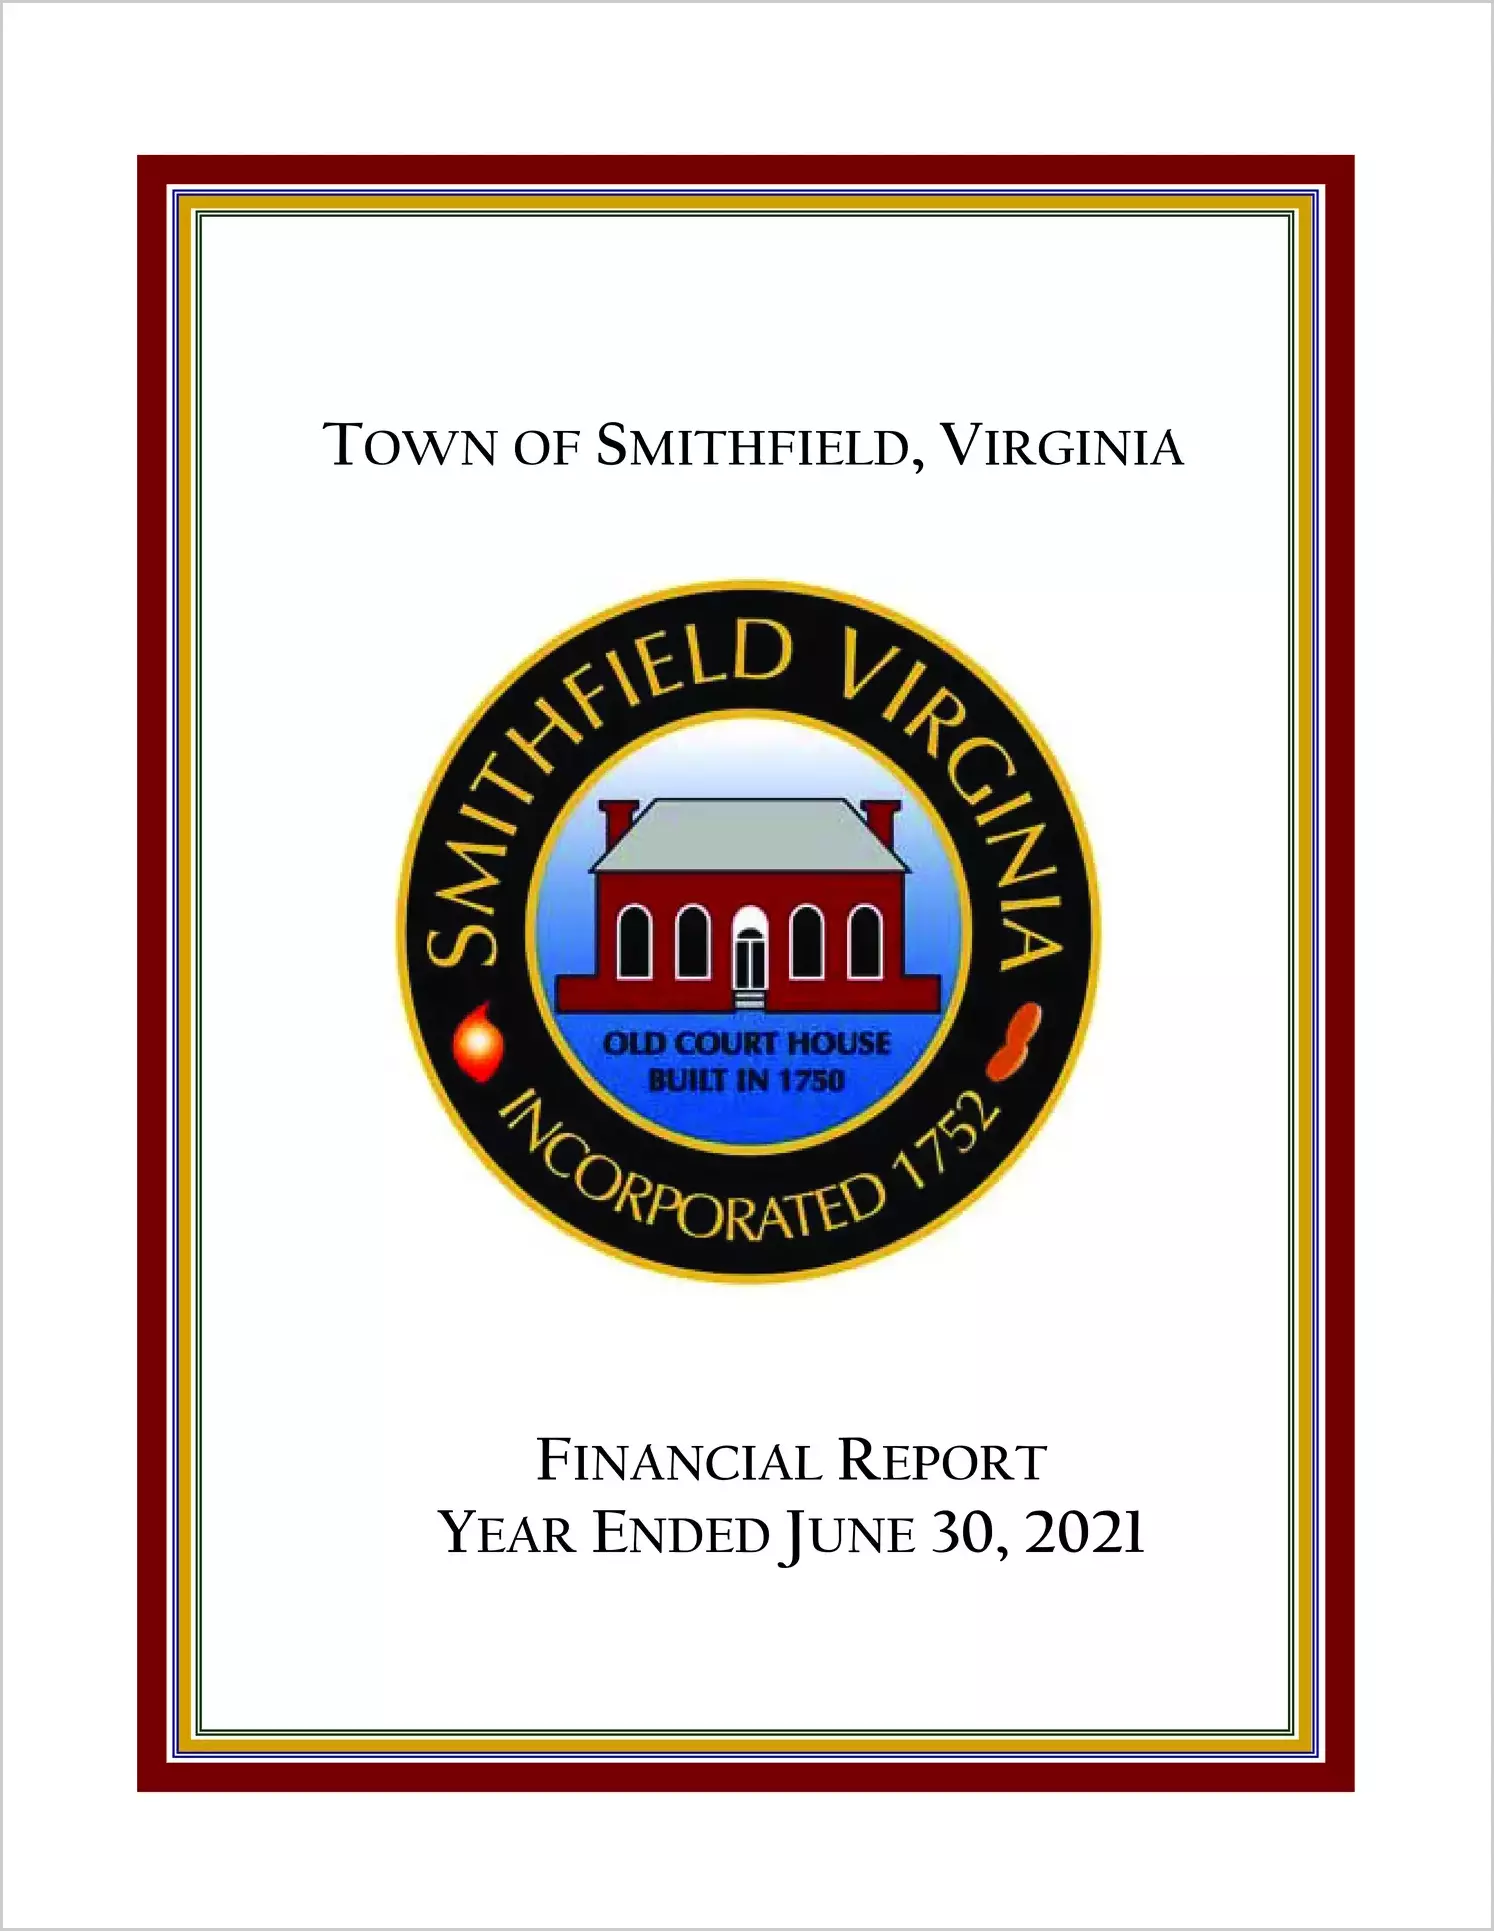 2021 Annual Financial Report for Town of Smithfield